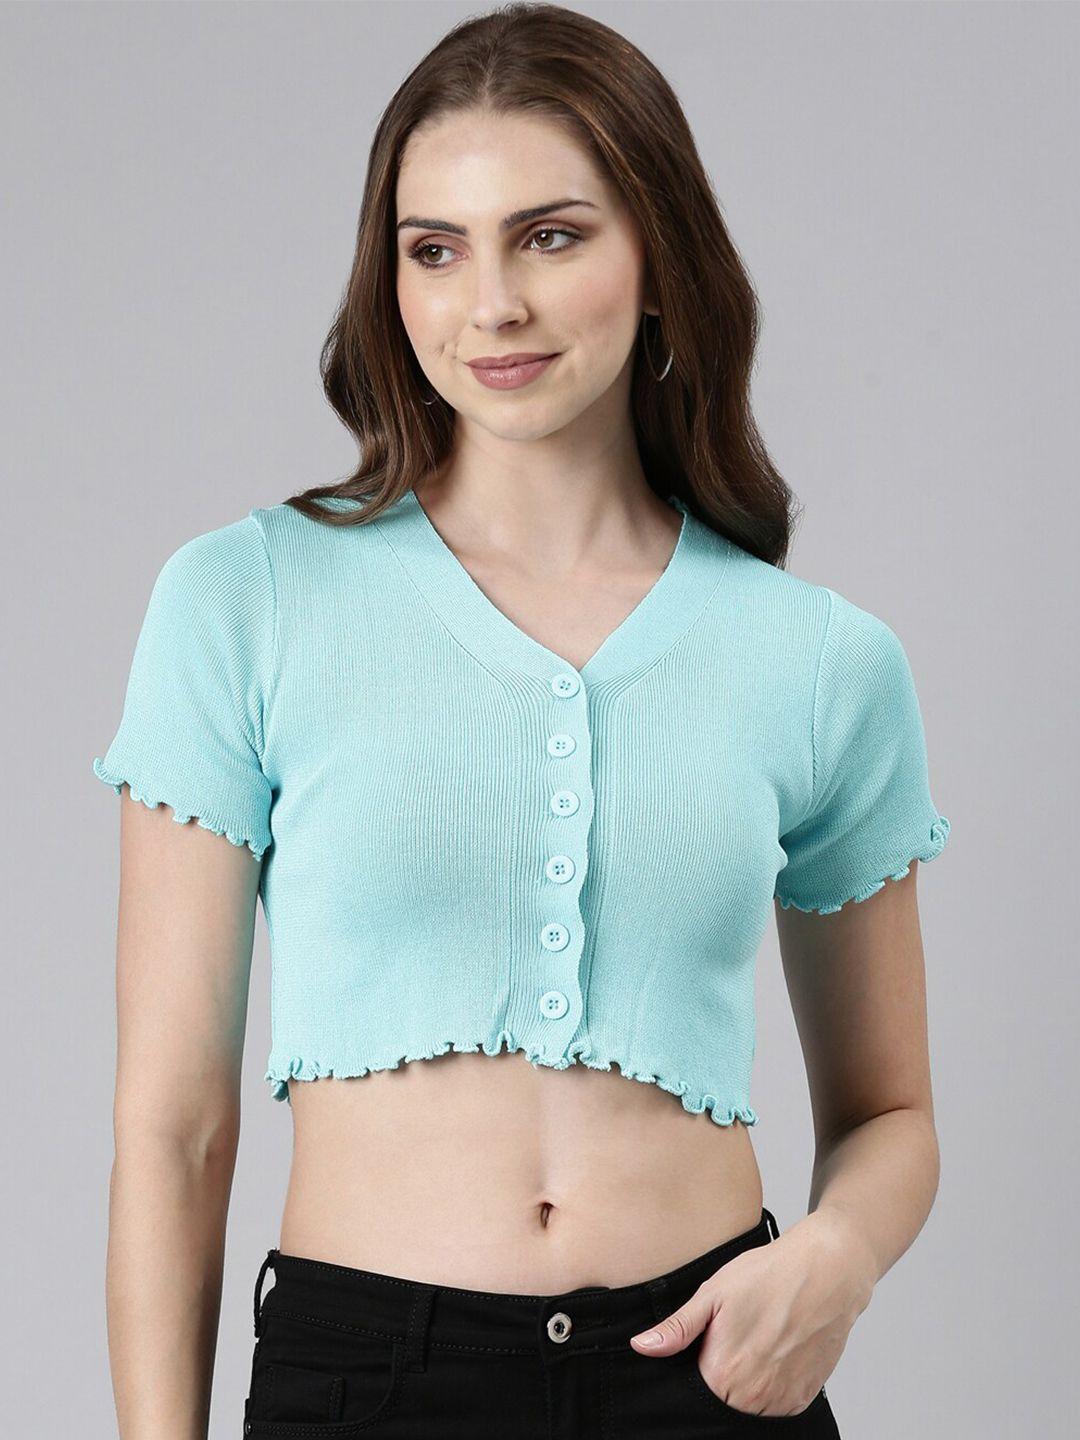 showoff v-neck fitted acrylic crop top